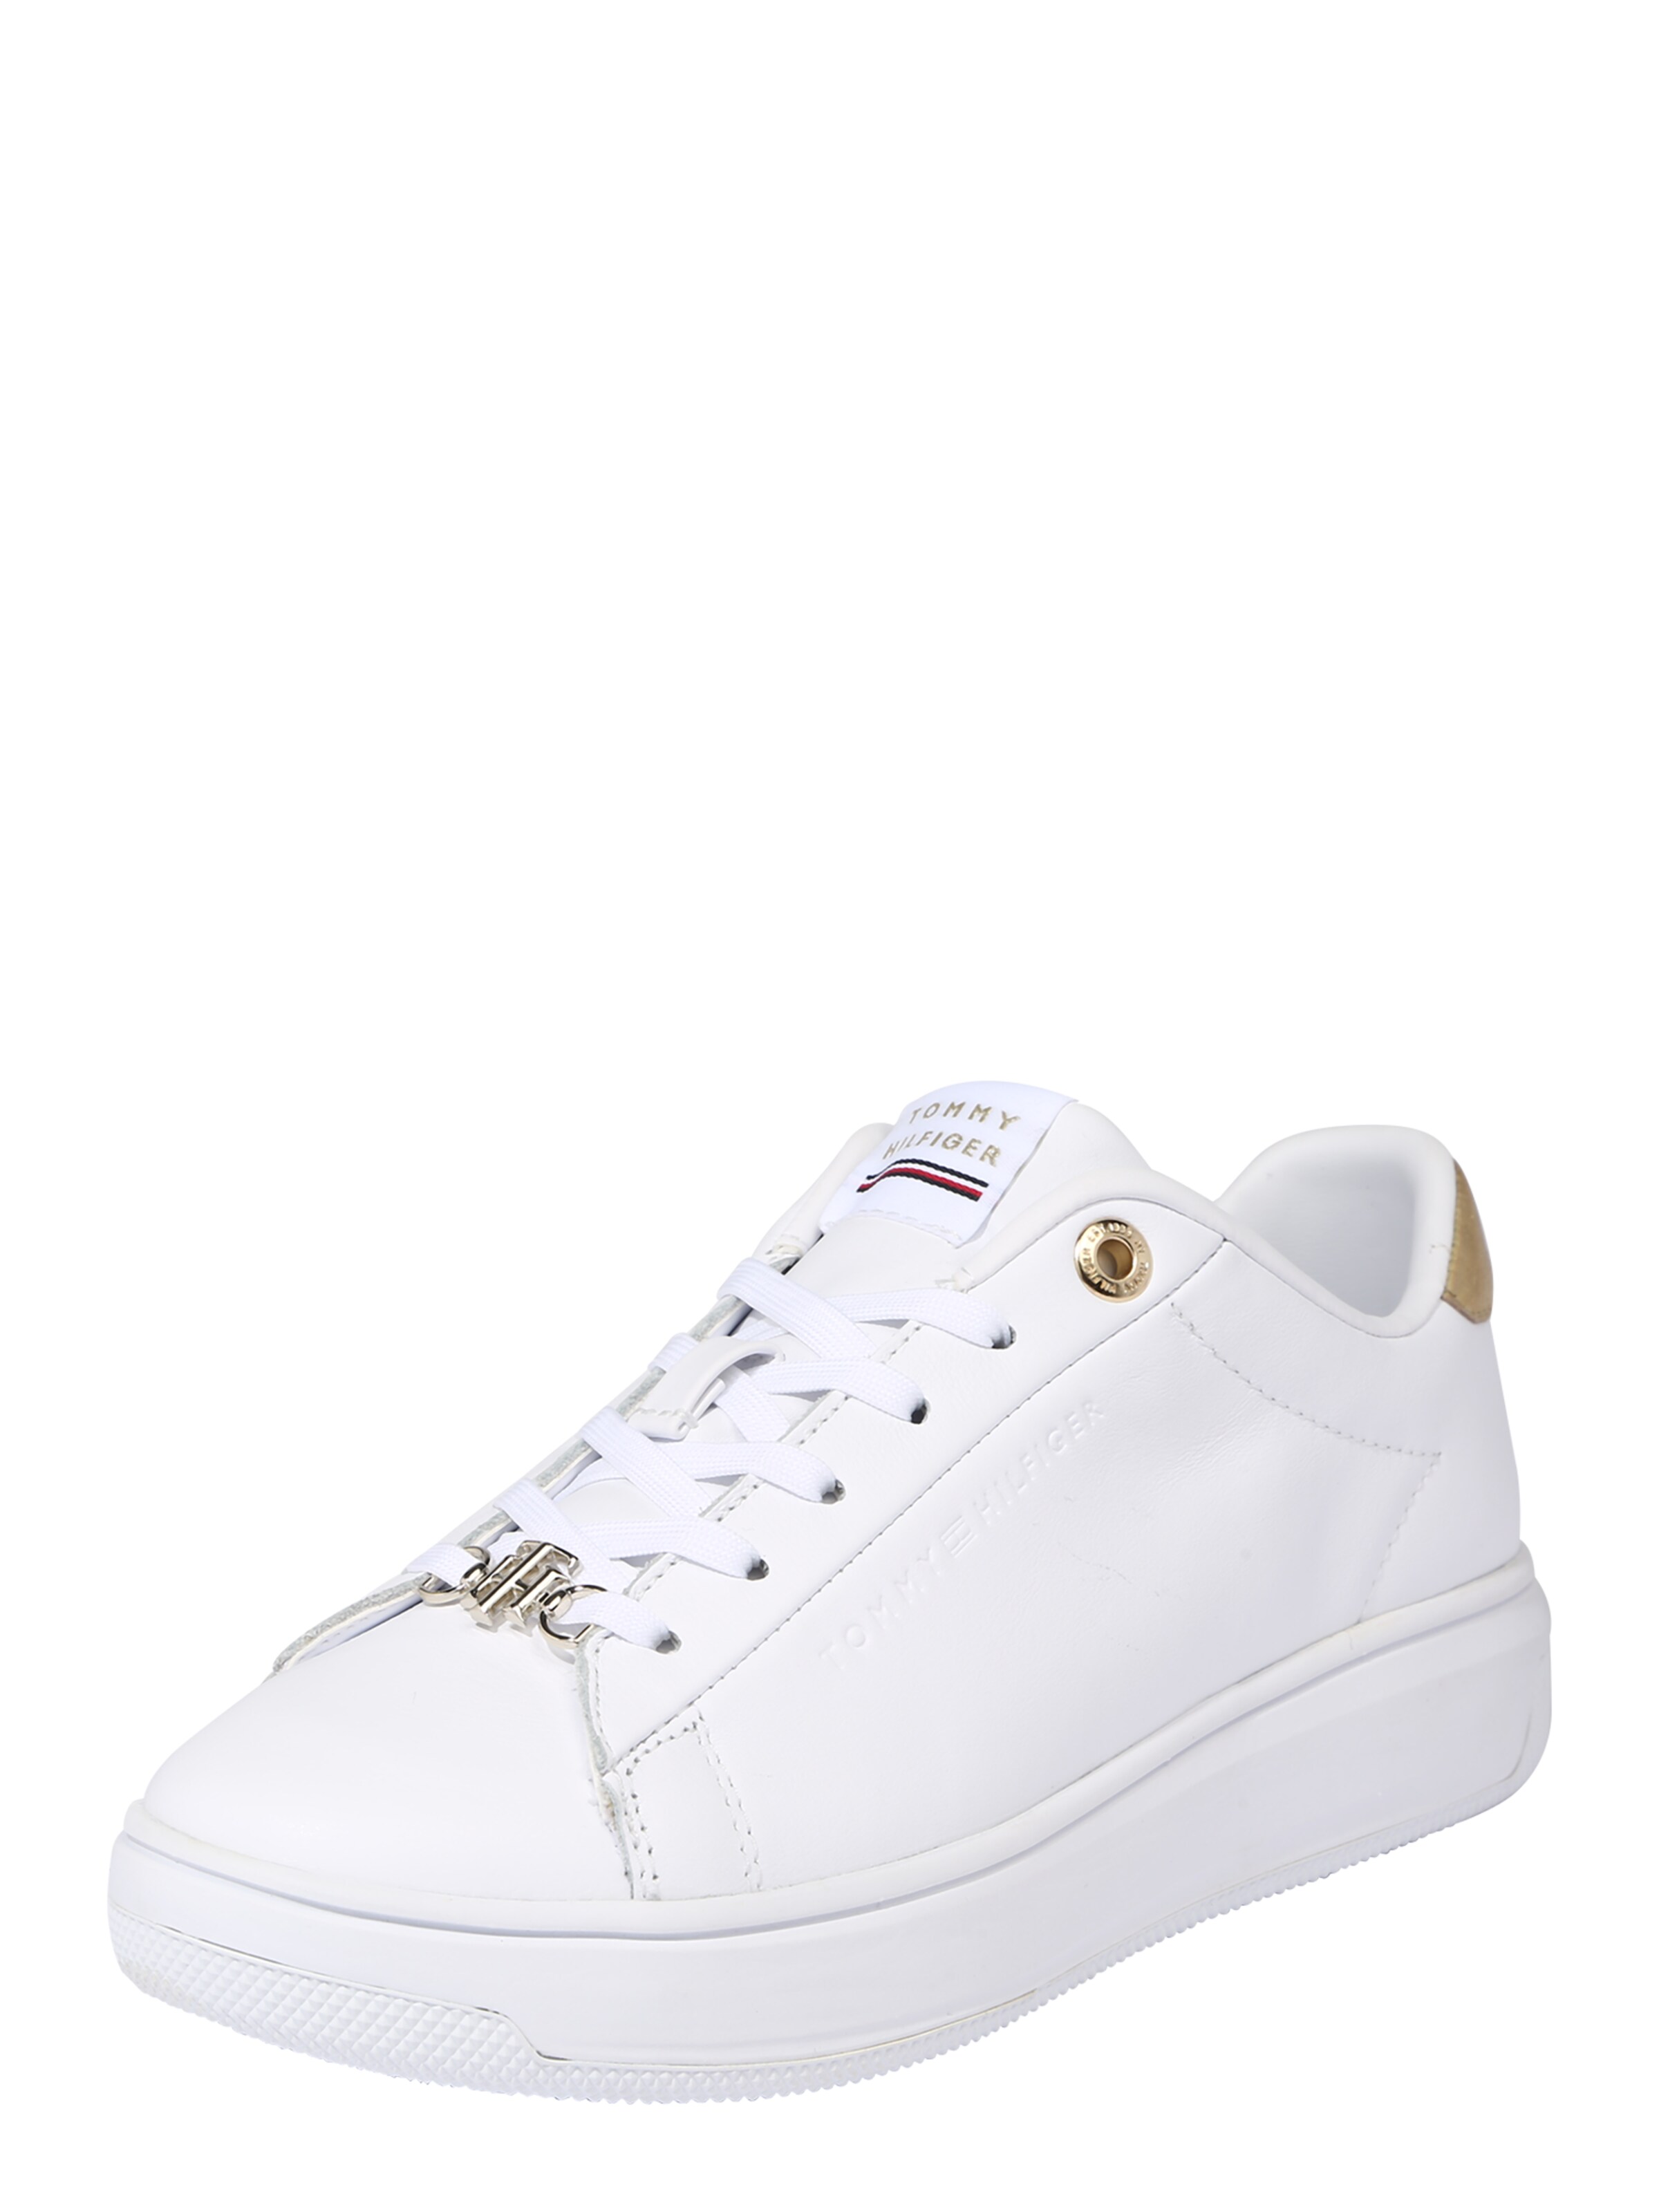 tommy hilfiger sneakers dama